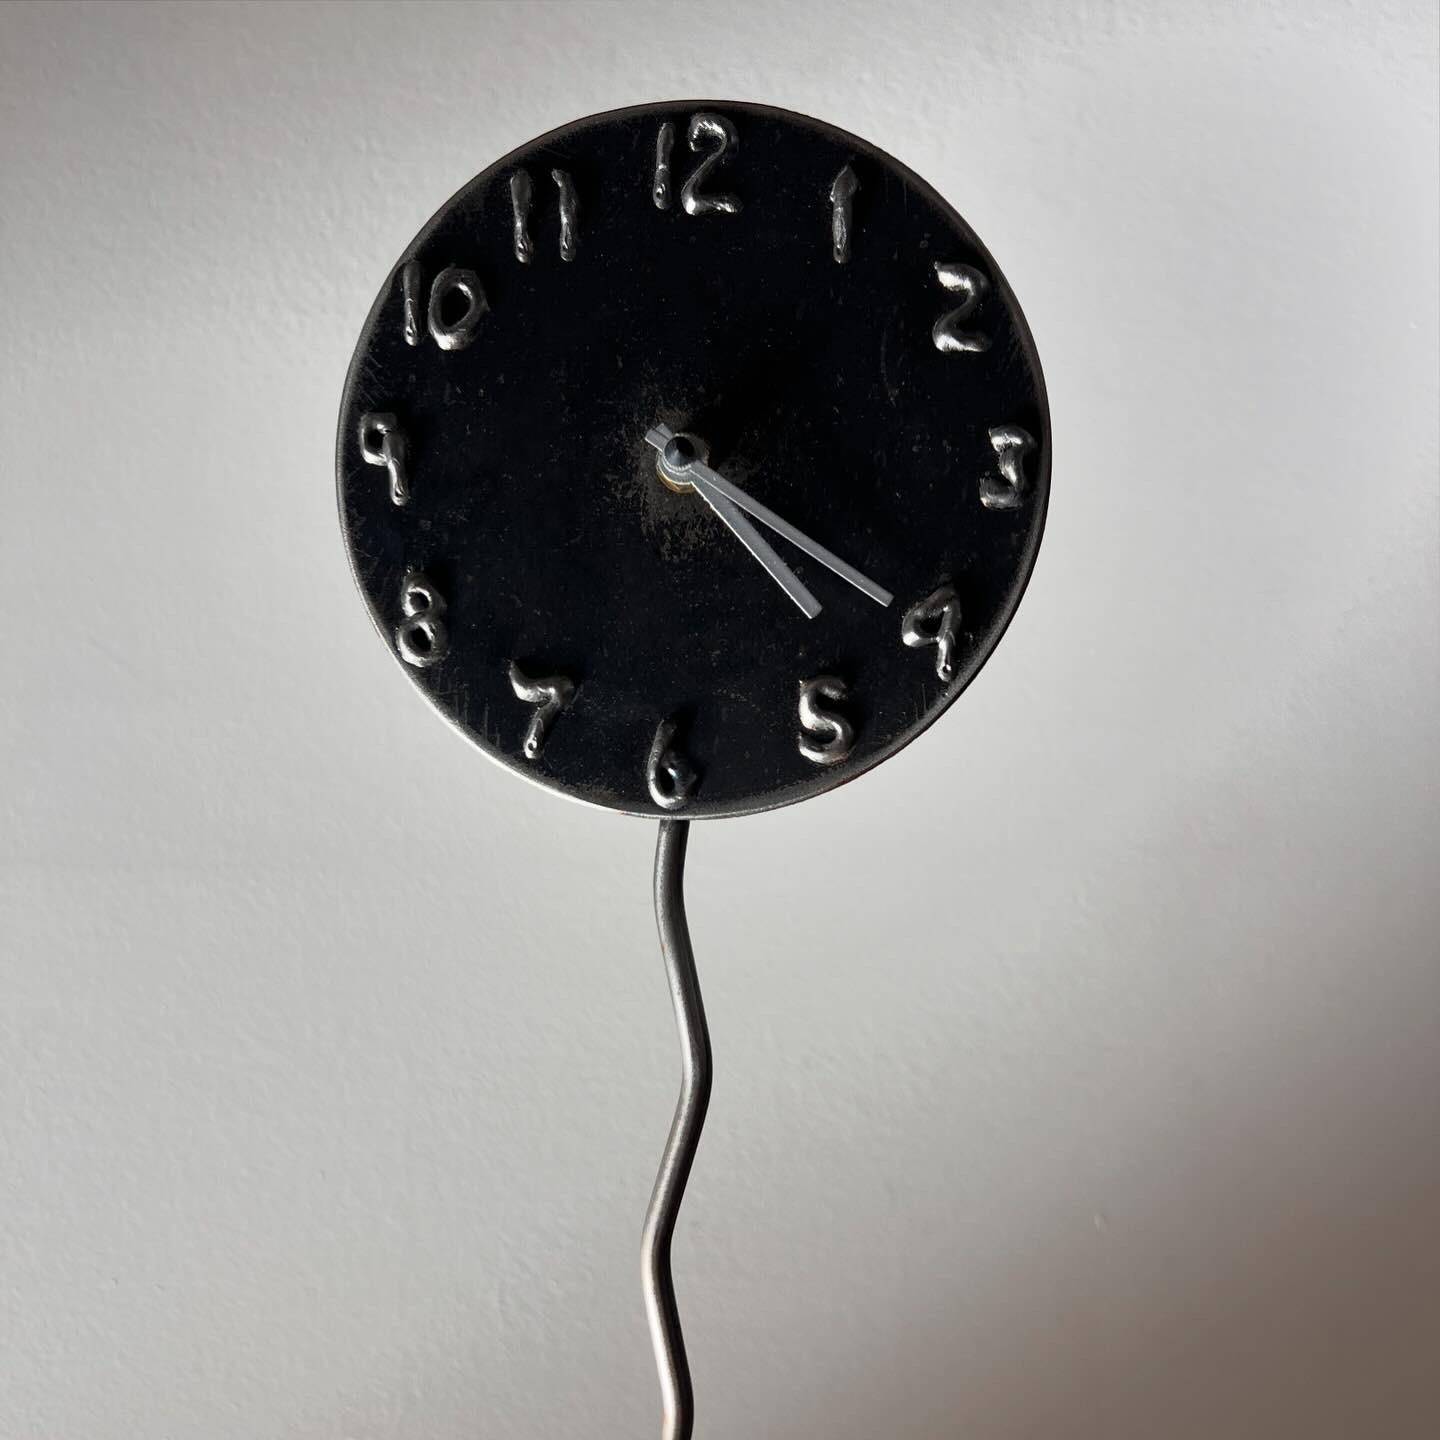  « Postmodern Form and Reform », a hand-forged metal sculpture clock with long squiggle base by Jon Sarriugarte, signed, 1991. With battery operated mechanism on verso. Works like a dream. Pick up in central west Los Angeles or we ship worldwide.